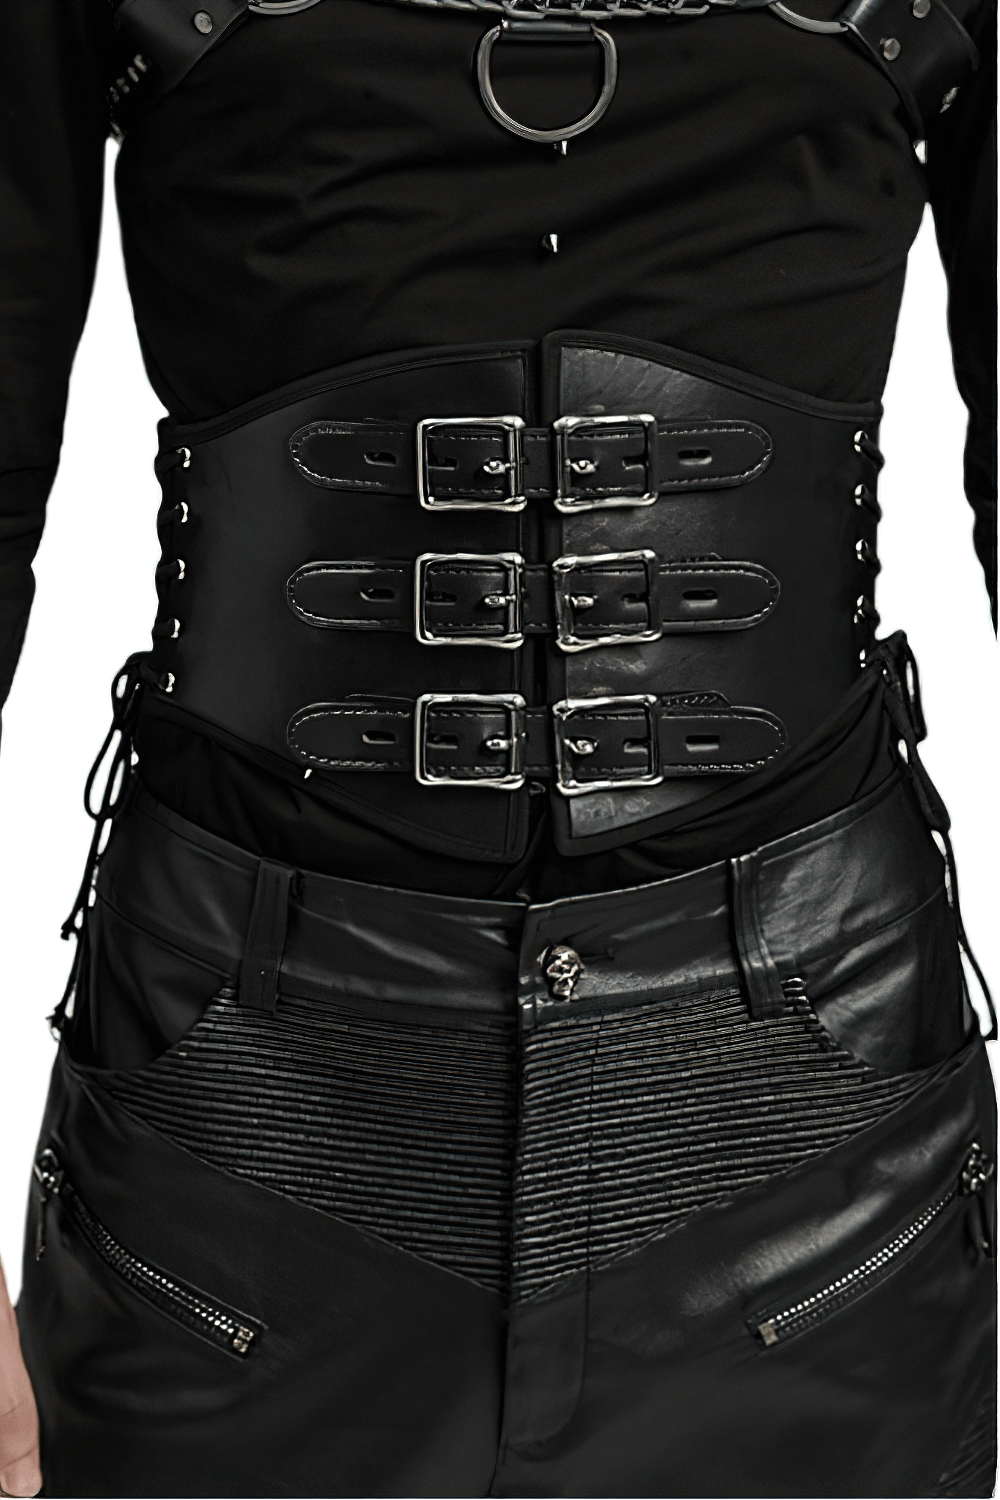 Edgy PU Leather Punk Belt with Buckles and Laces